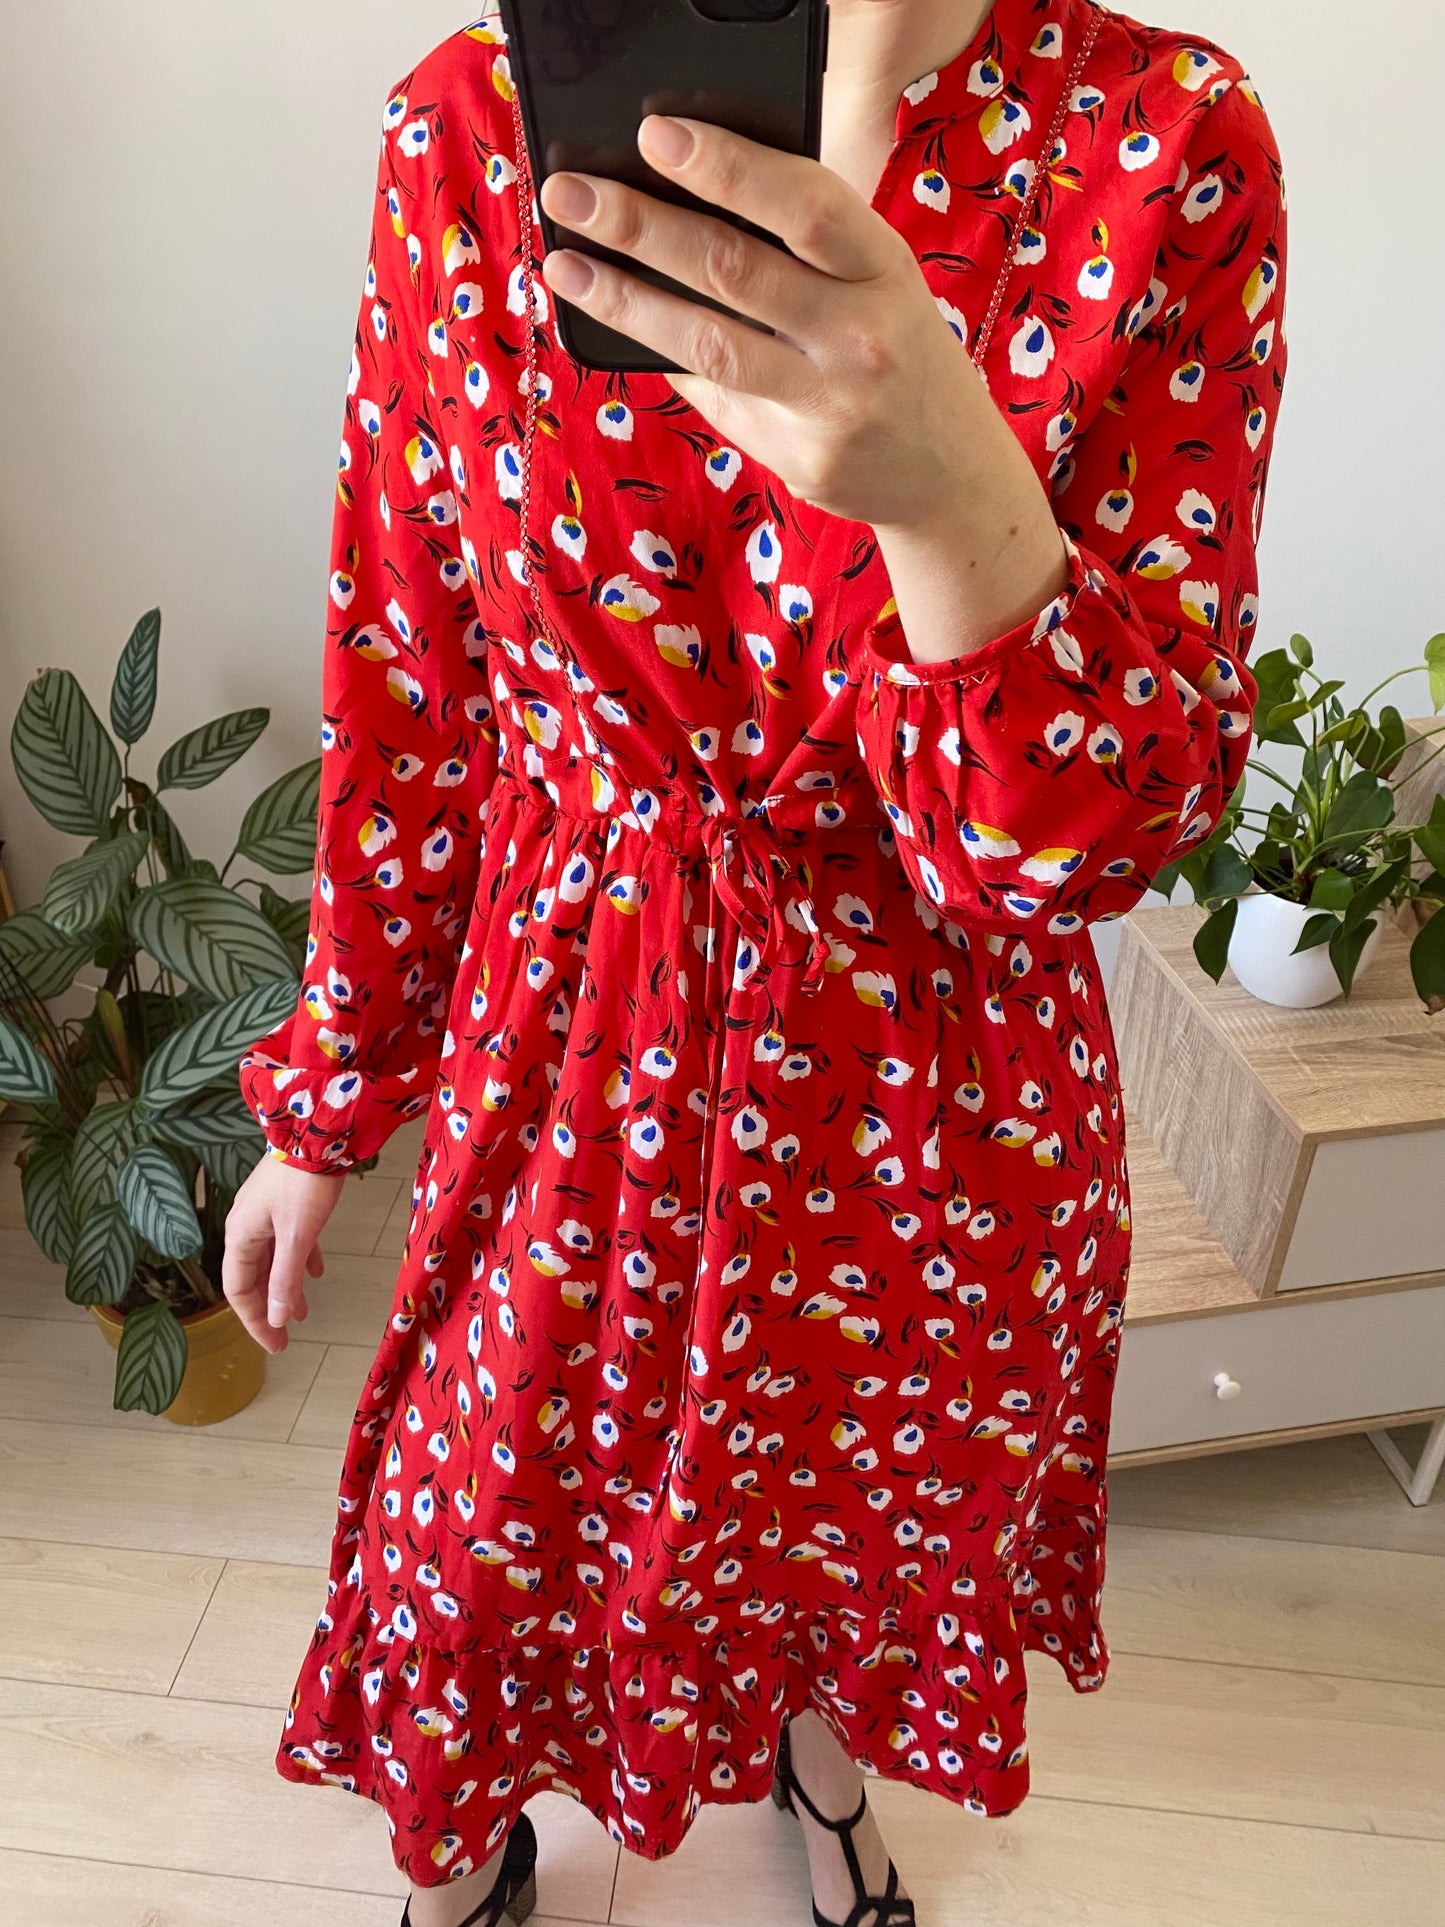 Robe longue Cherry route Taille 2 (M/L)